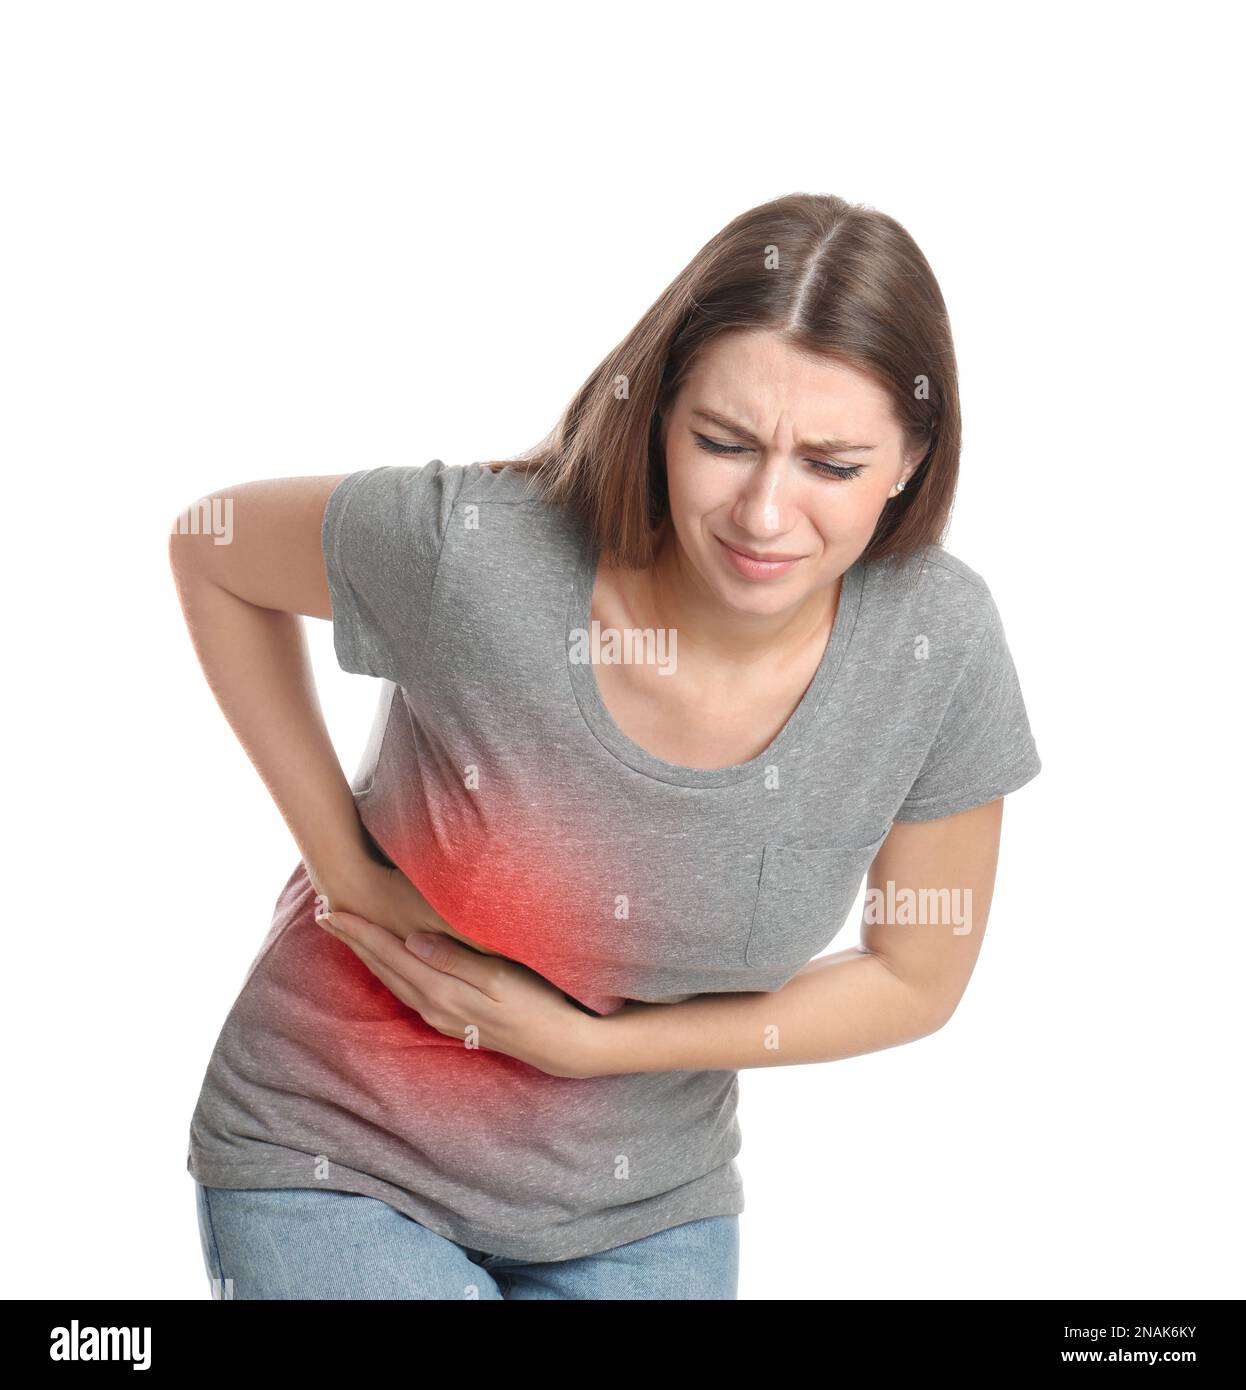 Young woman suffering from flank pain on white background Stock Photo